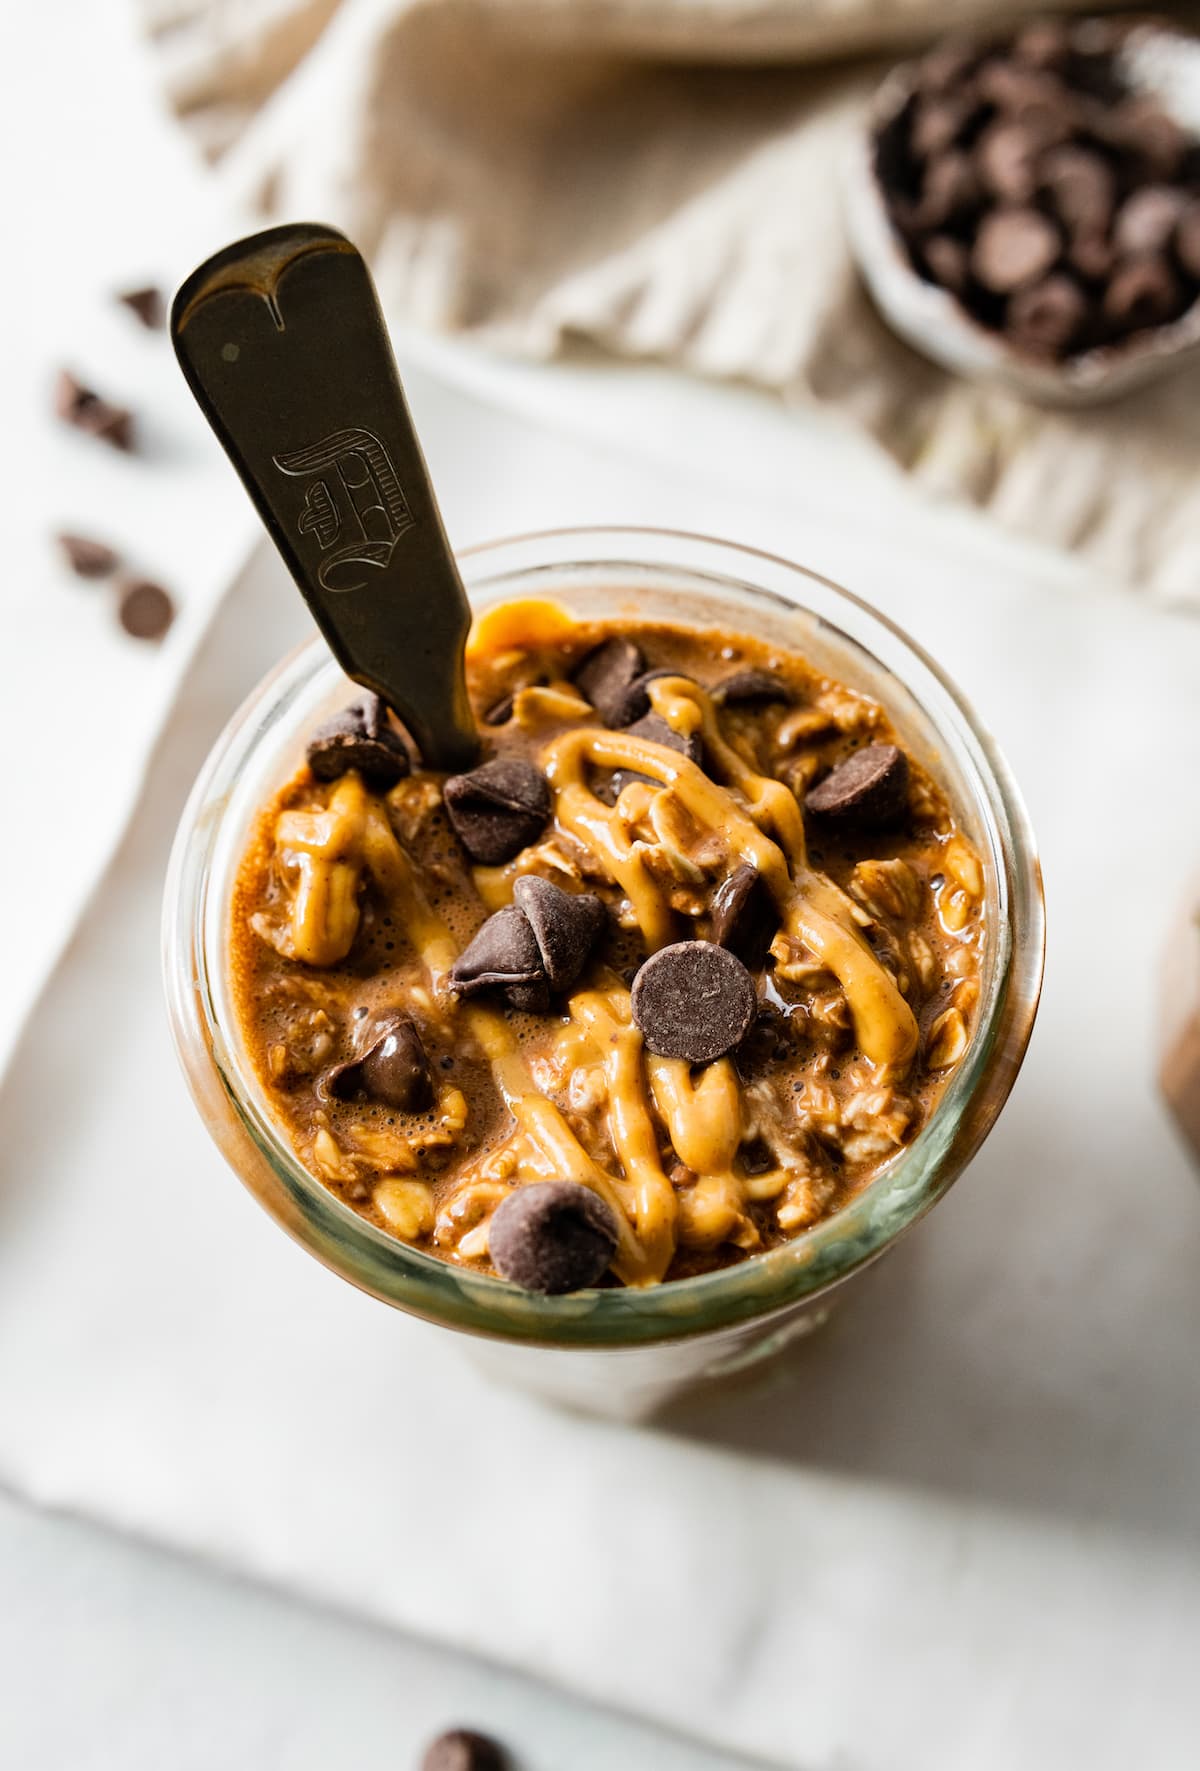 The chocolate overnight oats topped with chocolate chips and a drizzle of peanut butter and served with a spoon.